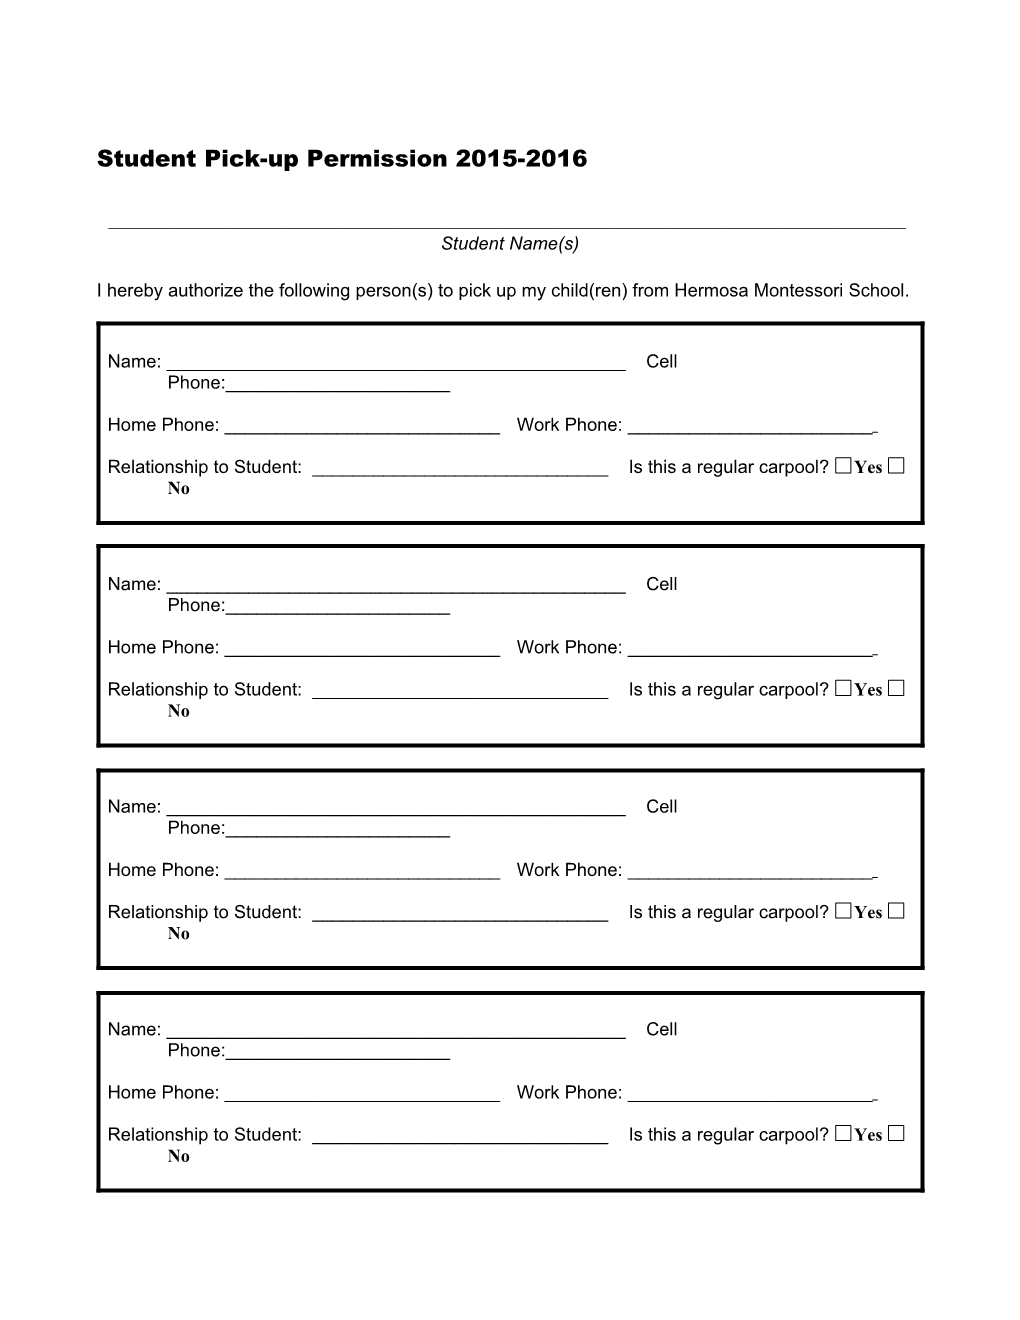 Permission for Student Pick-Up